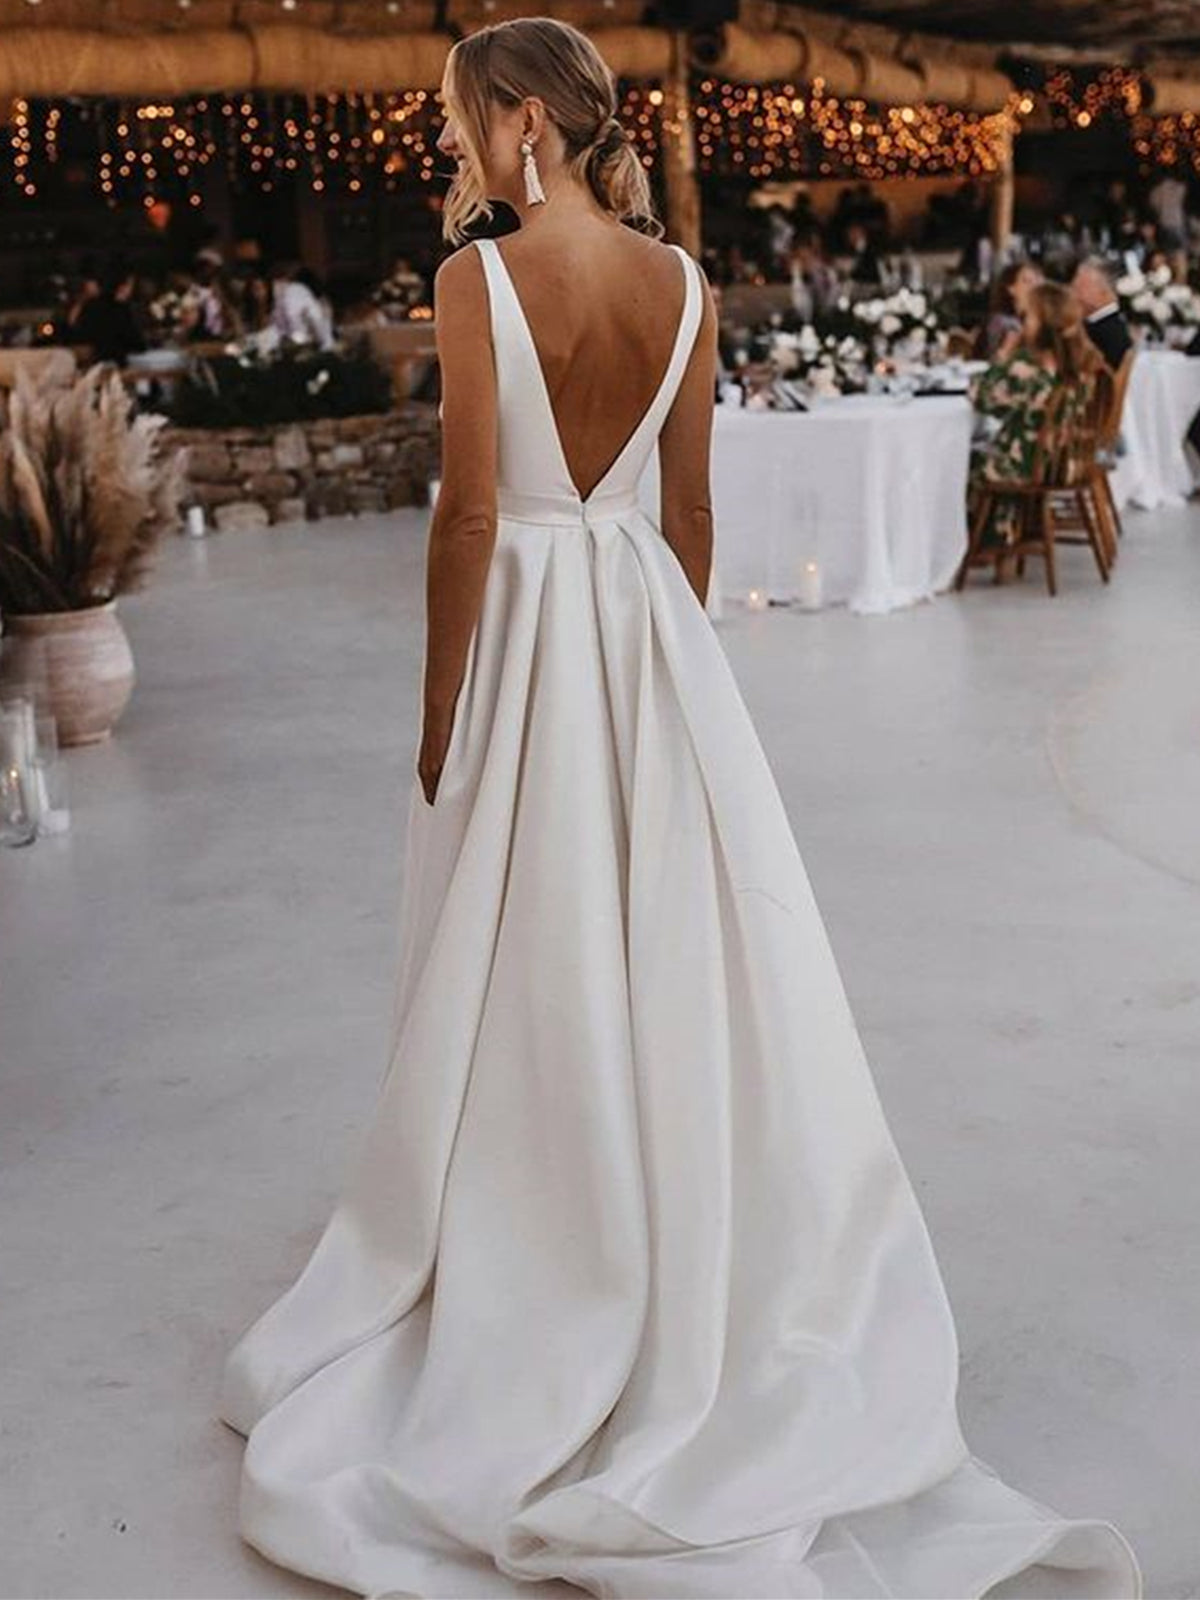 Morilee Wedding Dress | The Other White Dress - 12144 | Cheron's Bridal -  Cheron's Bridal & All Dressed Up Prom